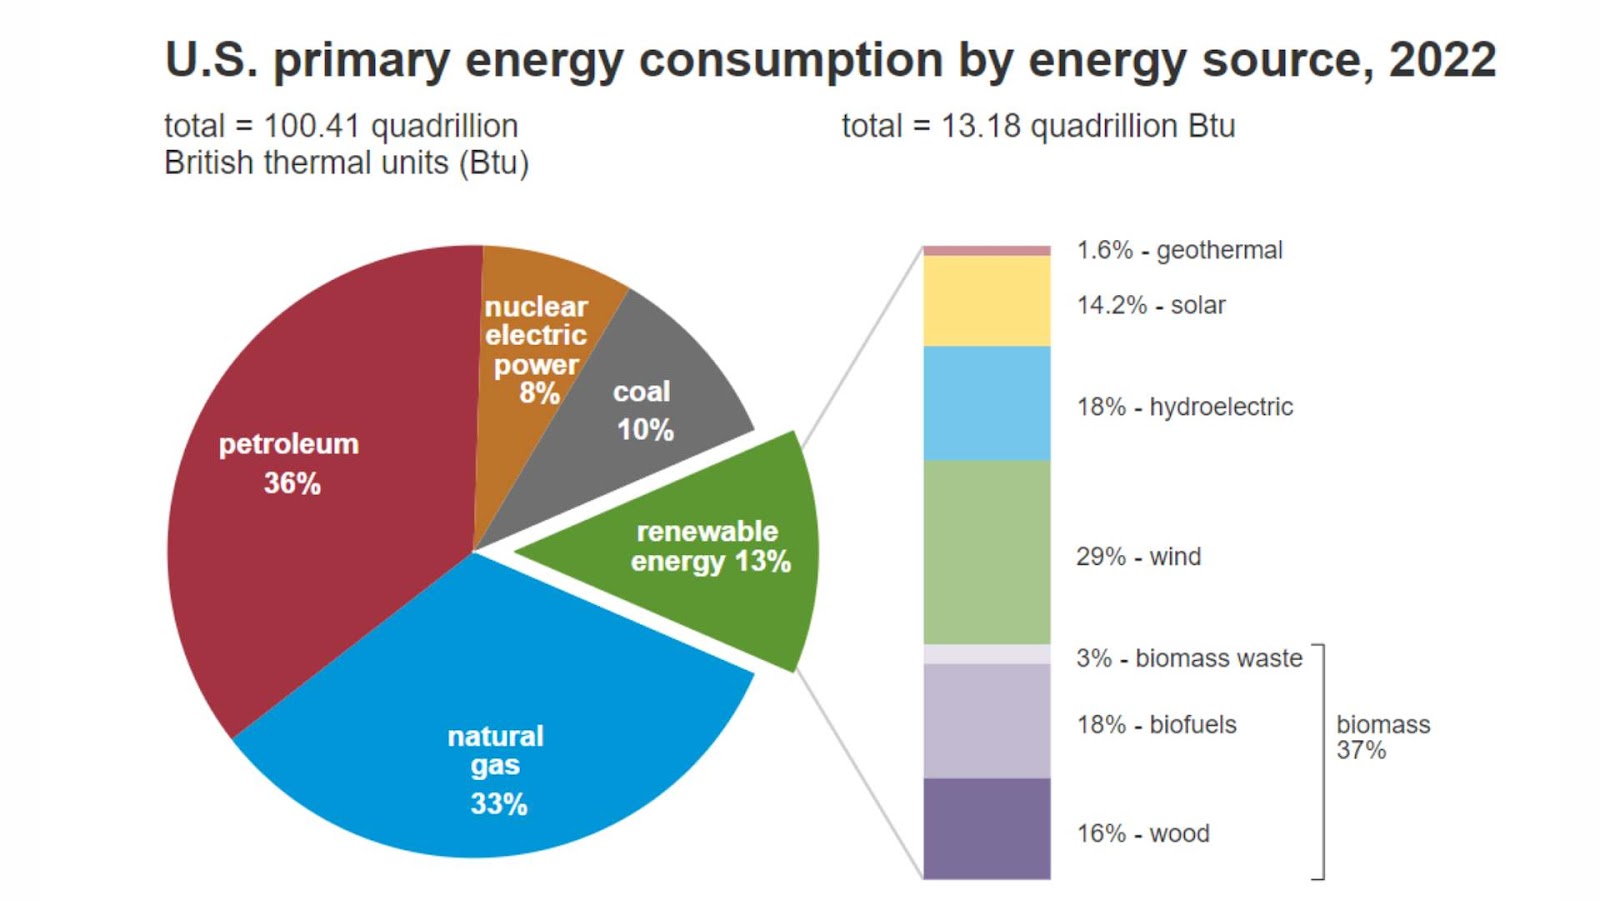 What is the difference between renewable and nonrenewable energy consumption?